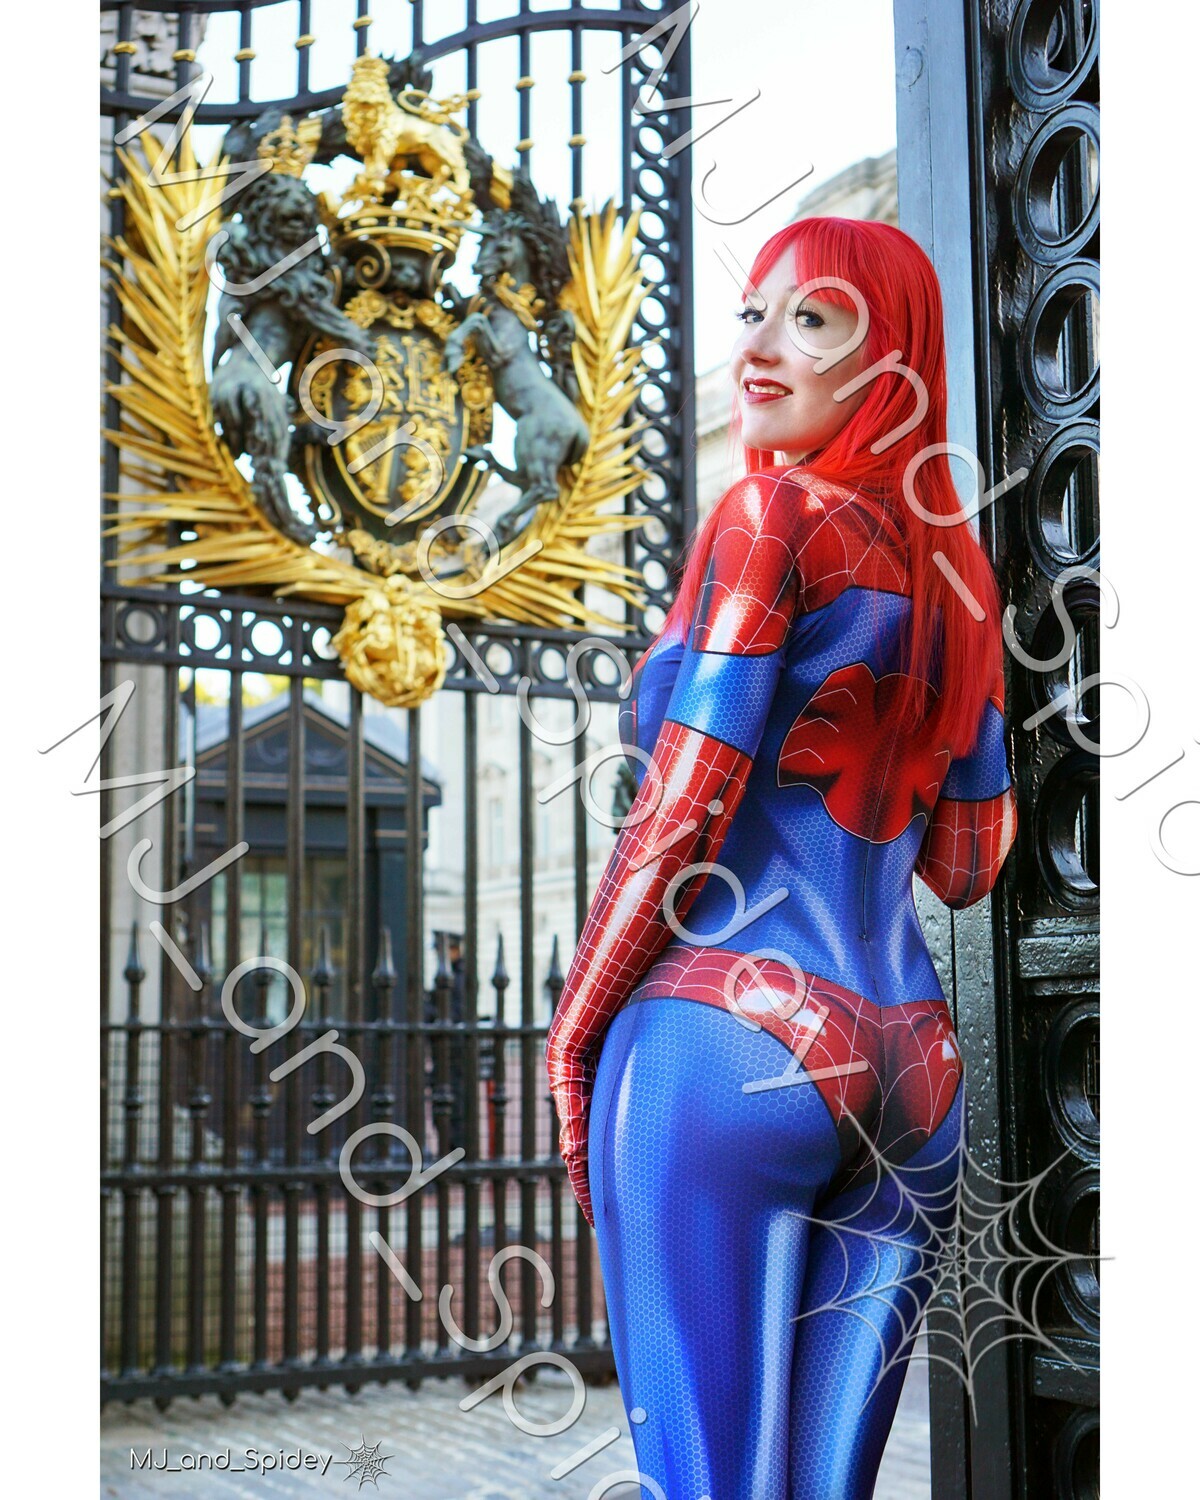 Marvel - Spider-Man - Mary Jane Watson - Classic Spider-Suit - UK 2 -  Cosplay Print (@MJ_and_Spidey, MJ and Spidey, Comics)